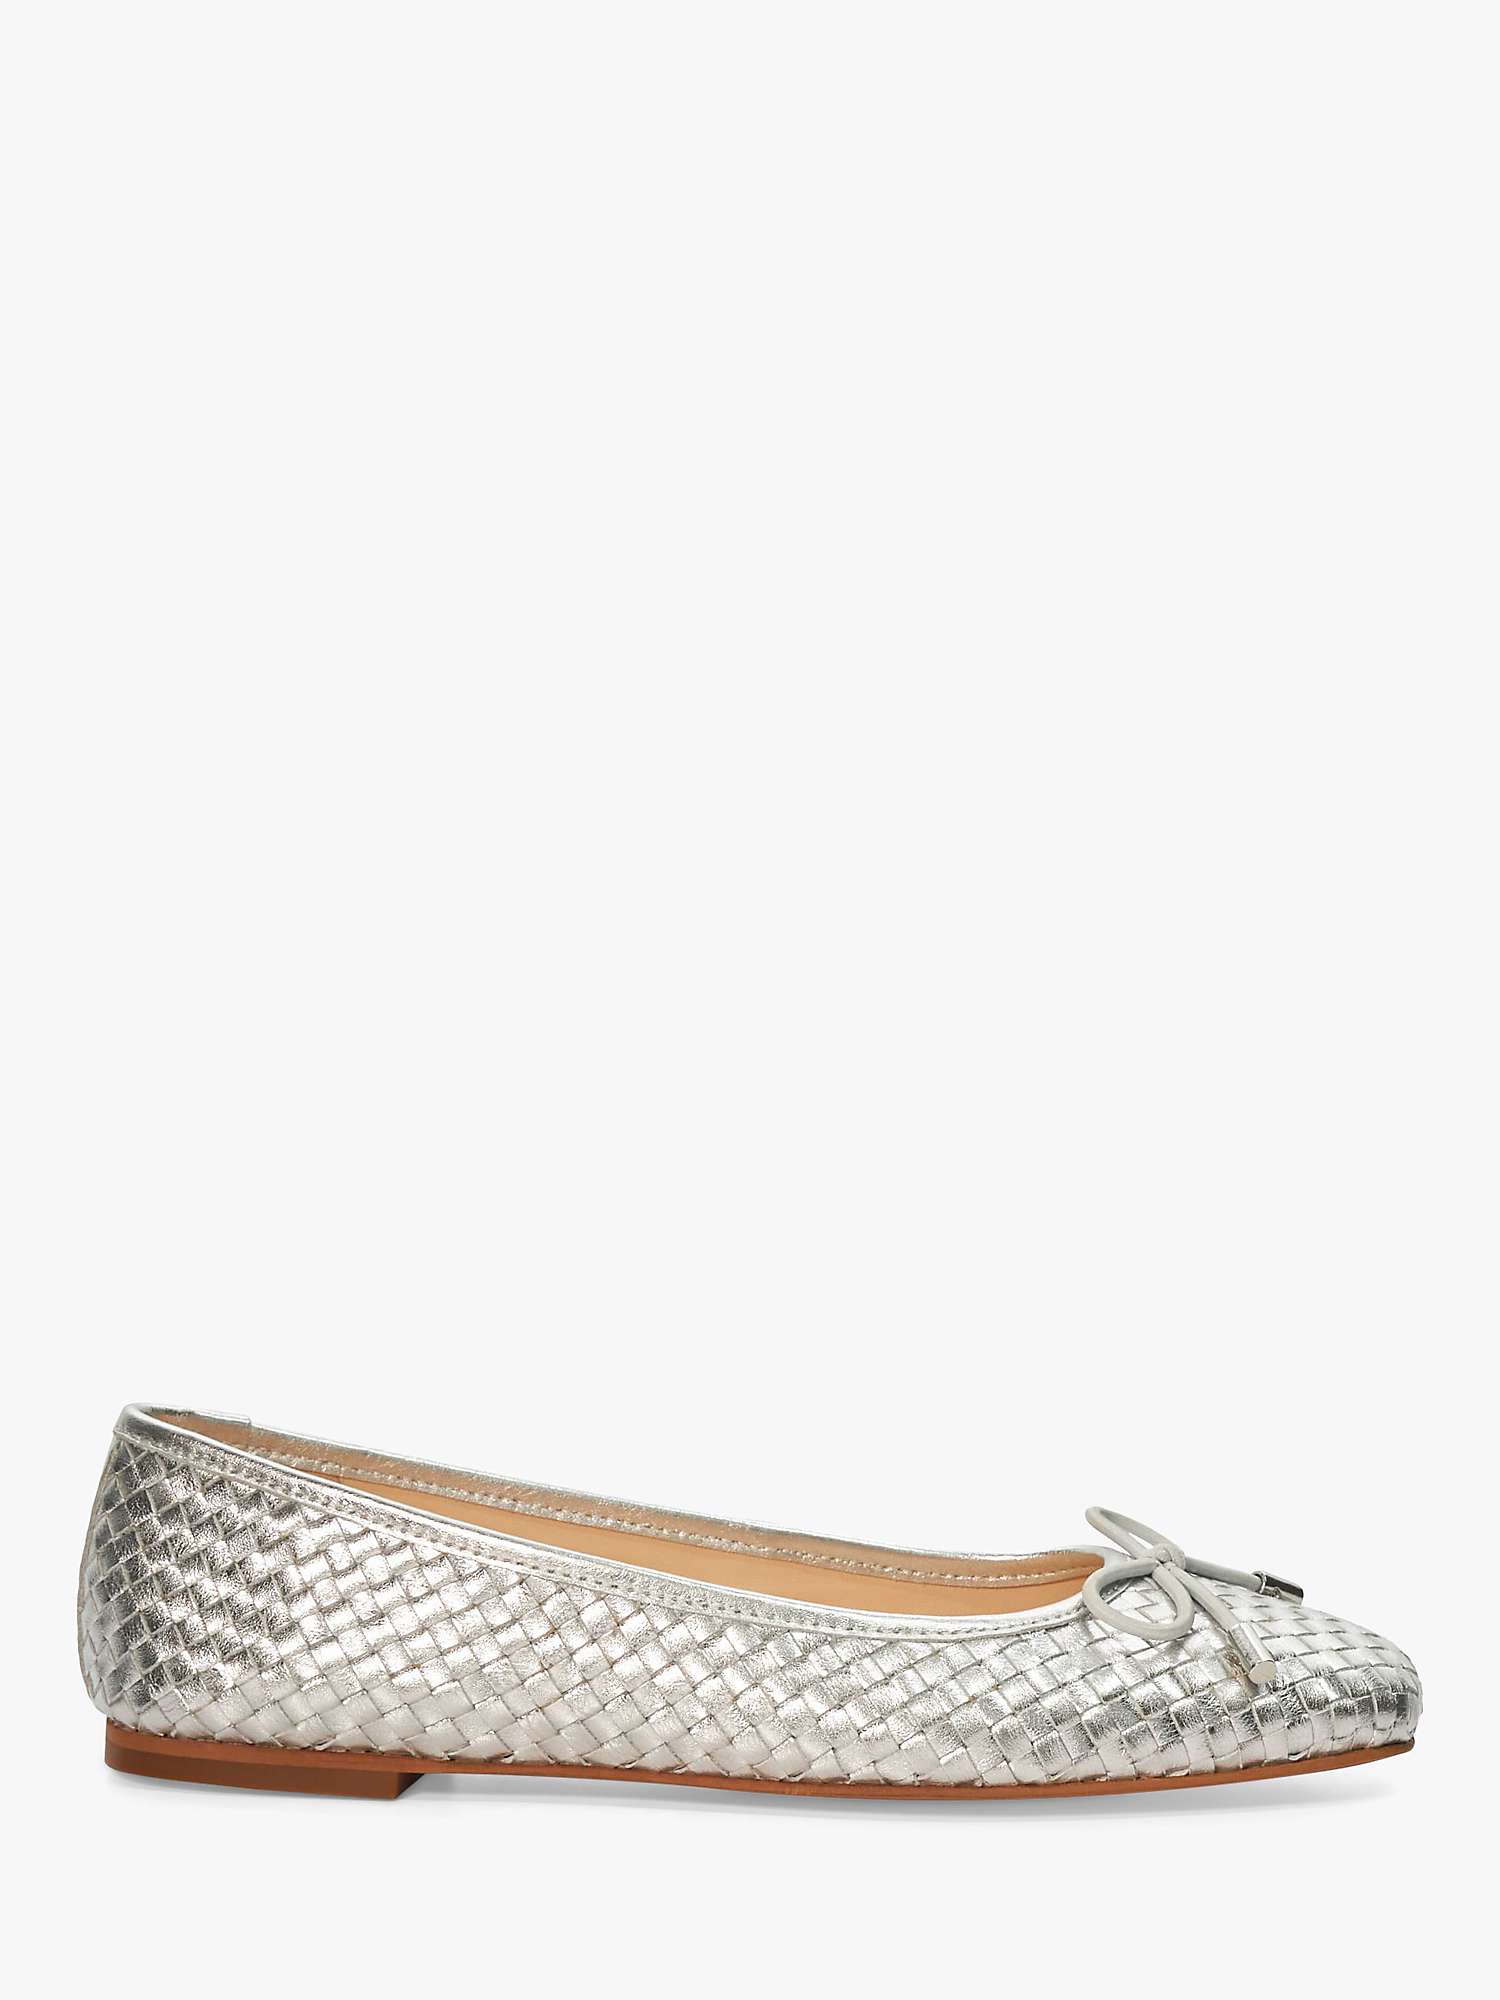 Buy Dune Heights Woven Leather Ballet Pumps Online at johnlewis.com